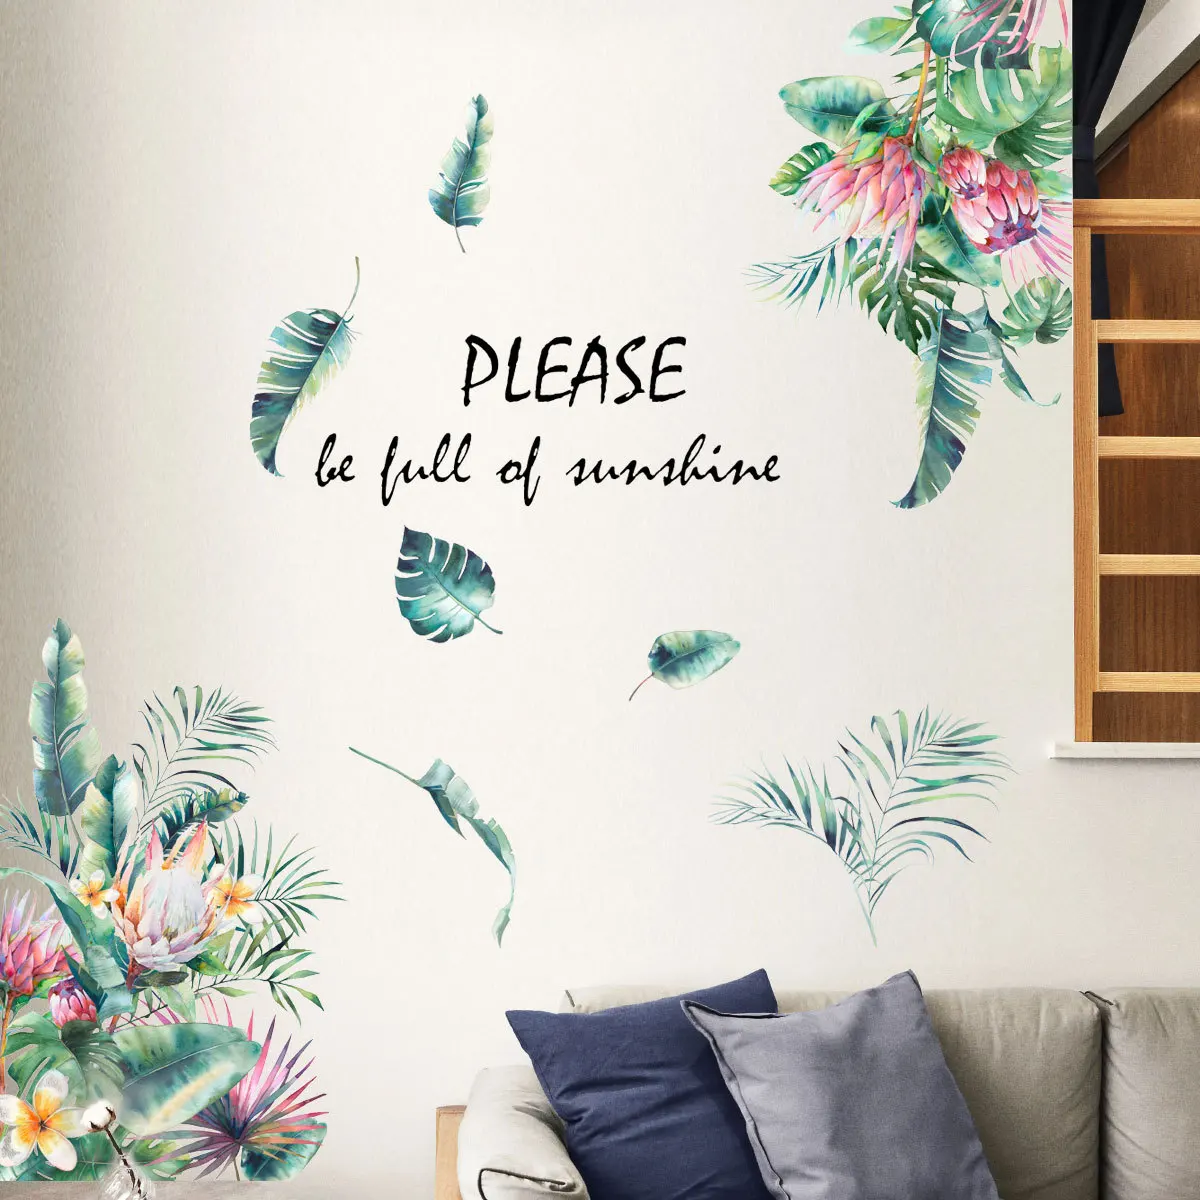 Green Leave Wall Stickers Plants Door Corner Room Decor Colorful Green Leaf Peel and Stick Headboard Decoration Christmas Home